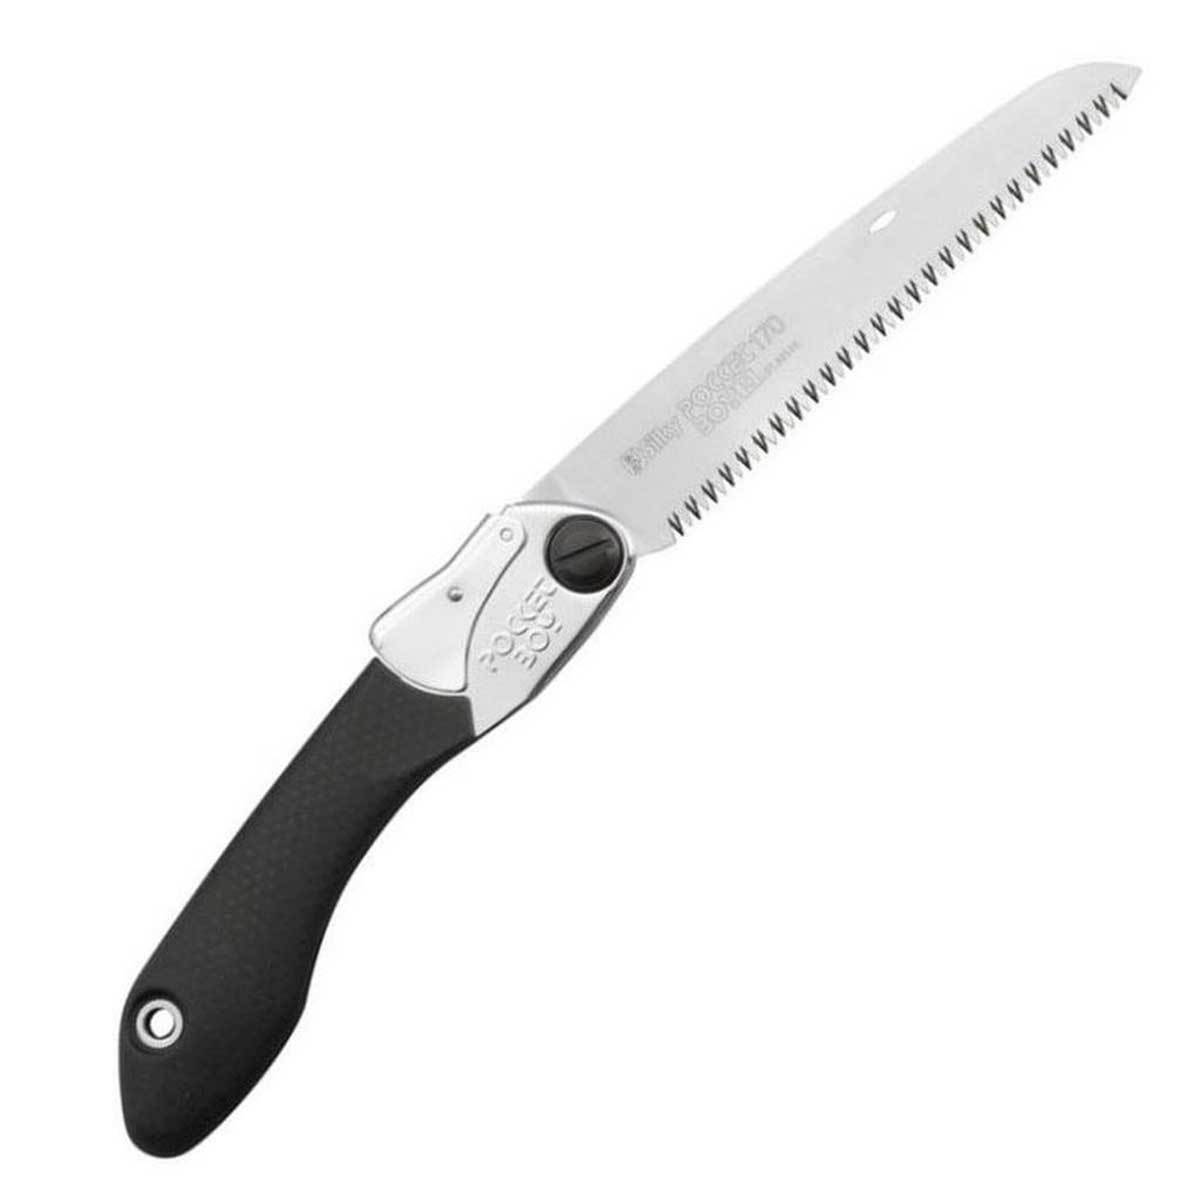 Silky Pocketboy 170 Folding Japanese Saw with black grip and medium taper ground blade for cutting softwood